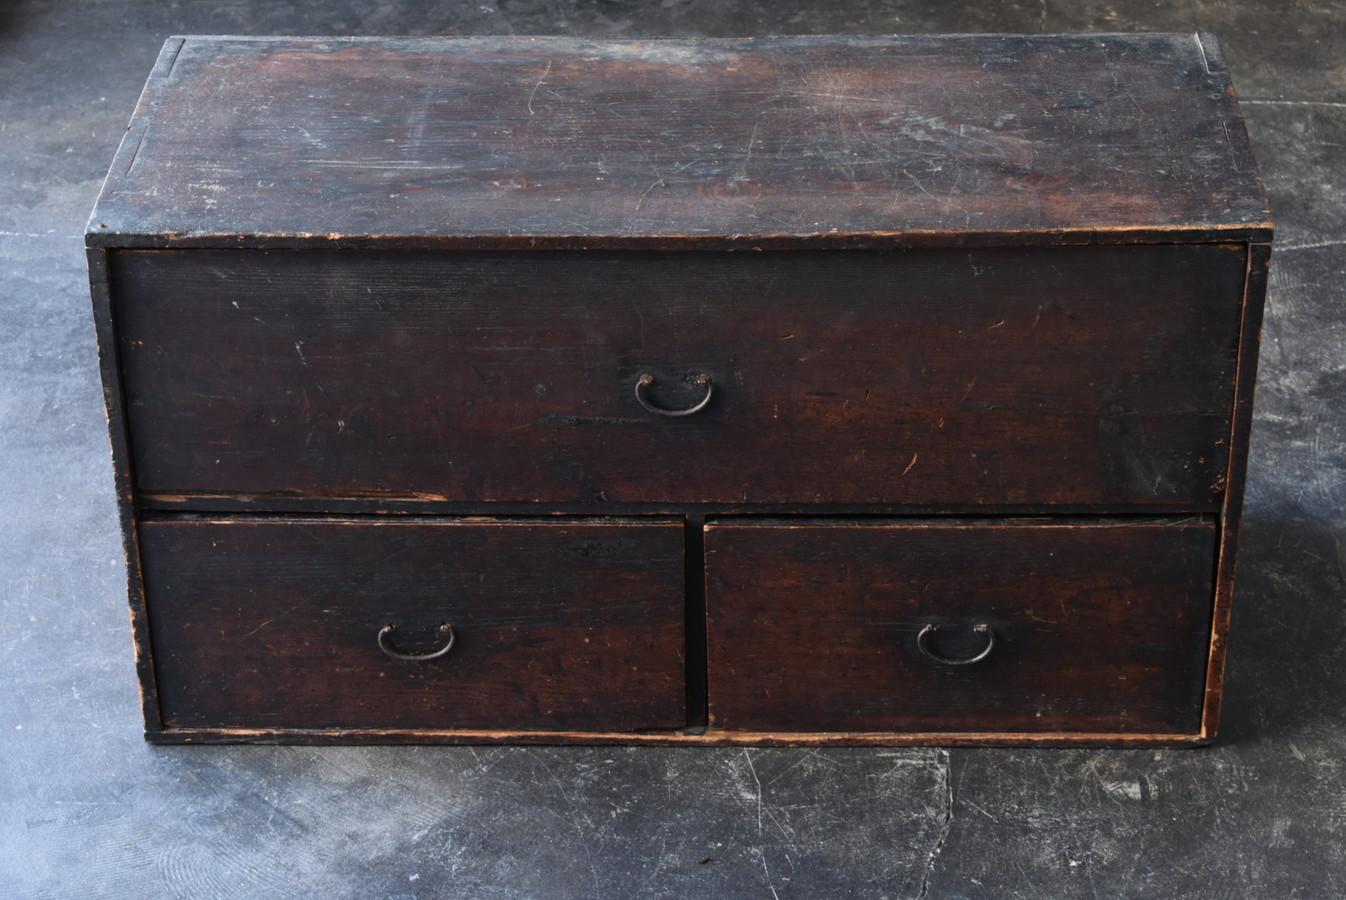 This is a wooden drawer made in Japan around the Meiji and Taisho periods (1868-1920).
It has a very simple shape and looks great.
The material is probably pine wood.
The metal fittings of the handle are made of iron.

Furniture as simple as